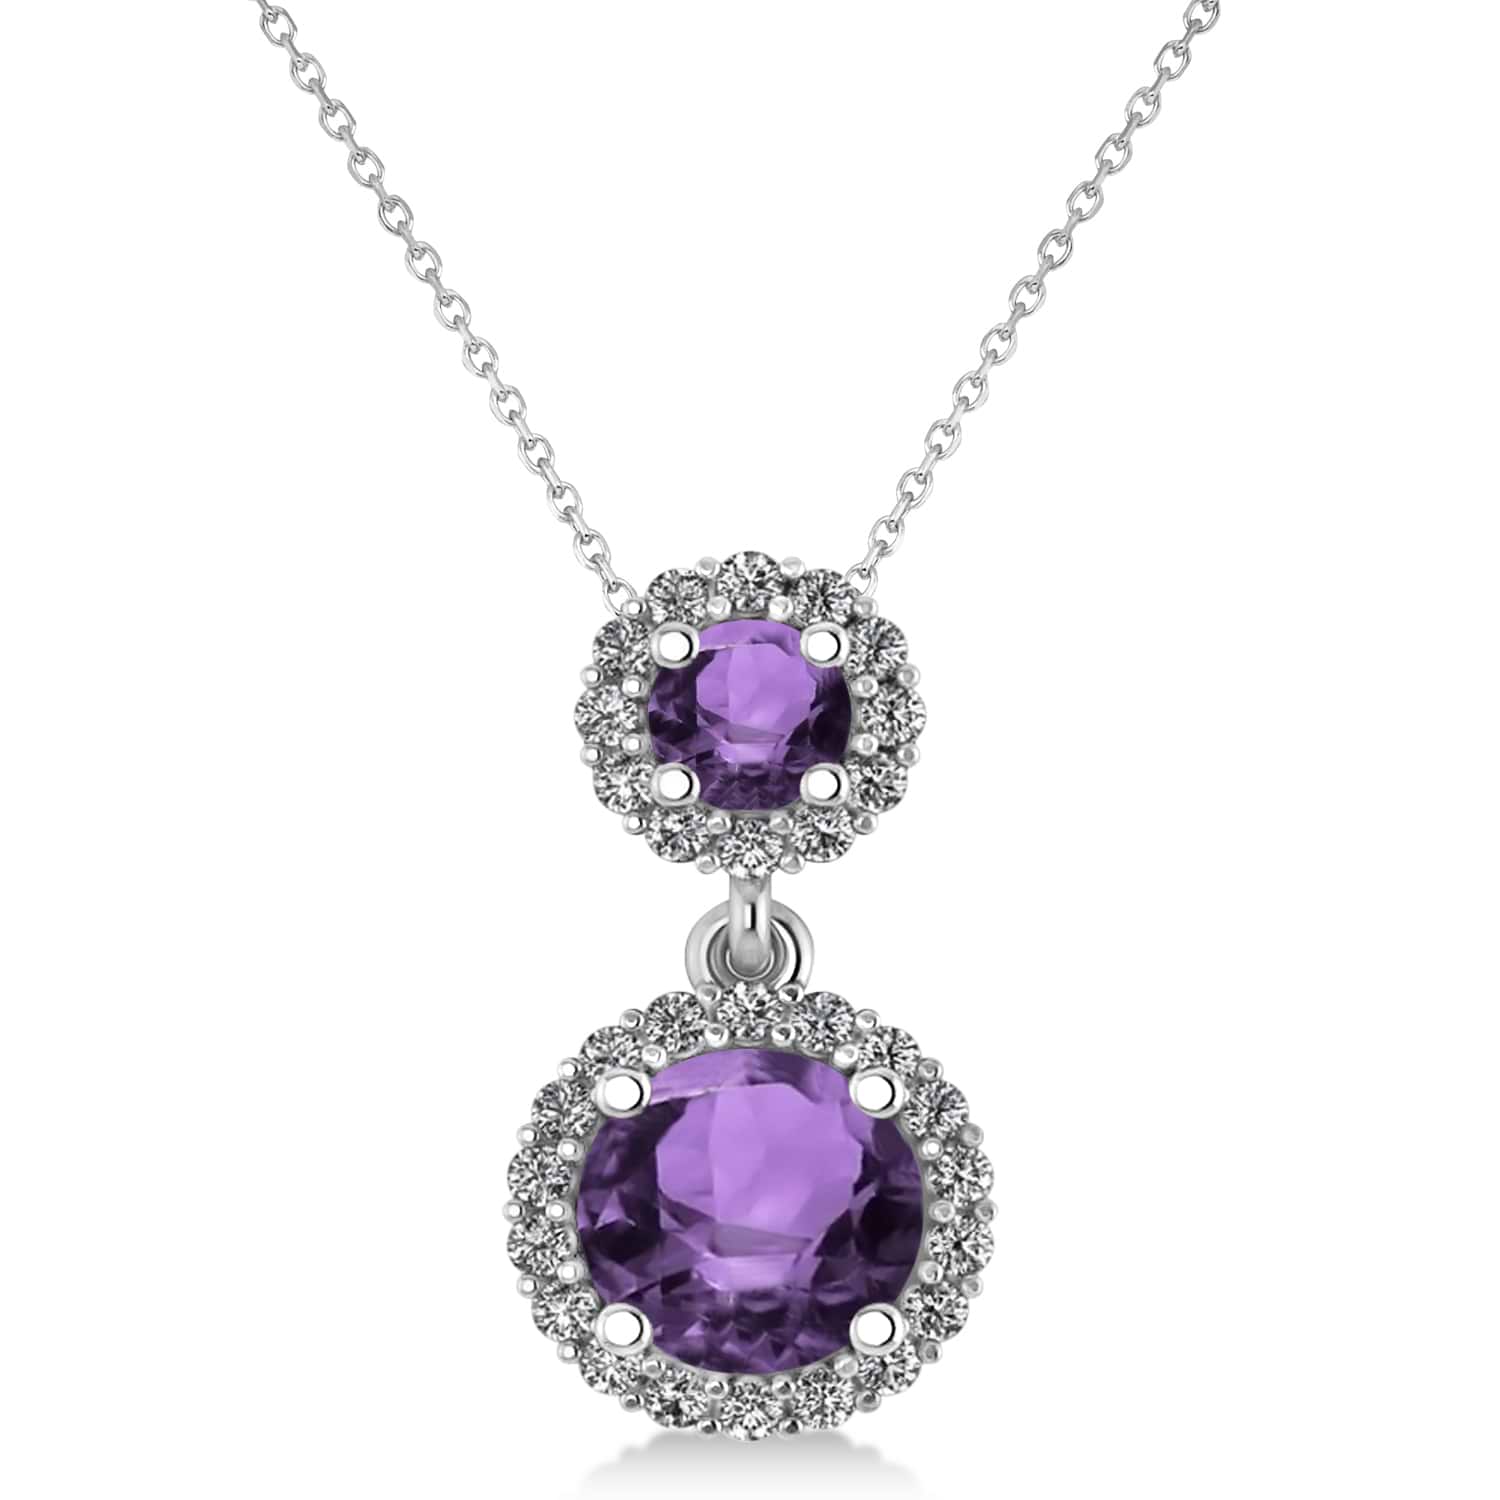 Two Stone Amethyst & Halo Diamond Necklace 14k White Gold (1.50ct)